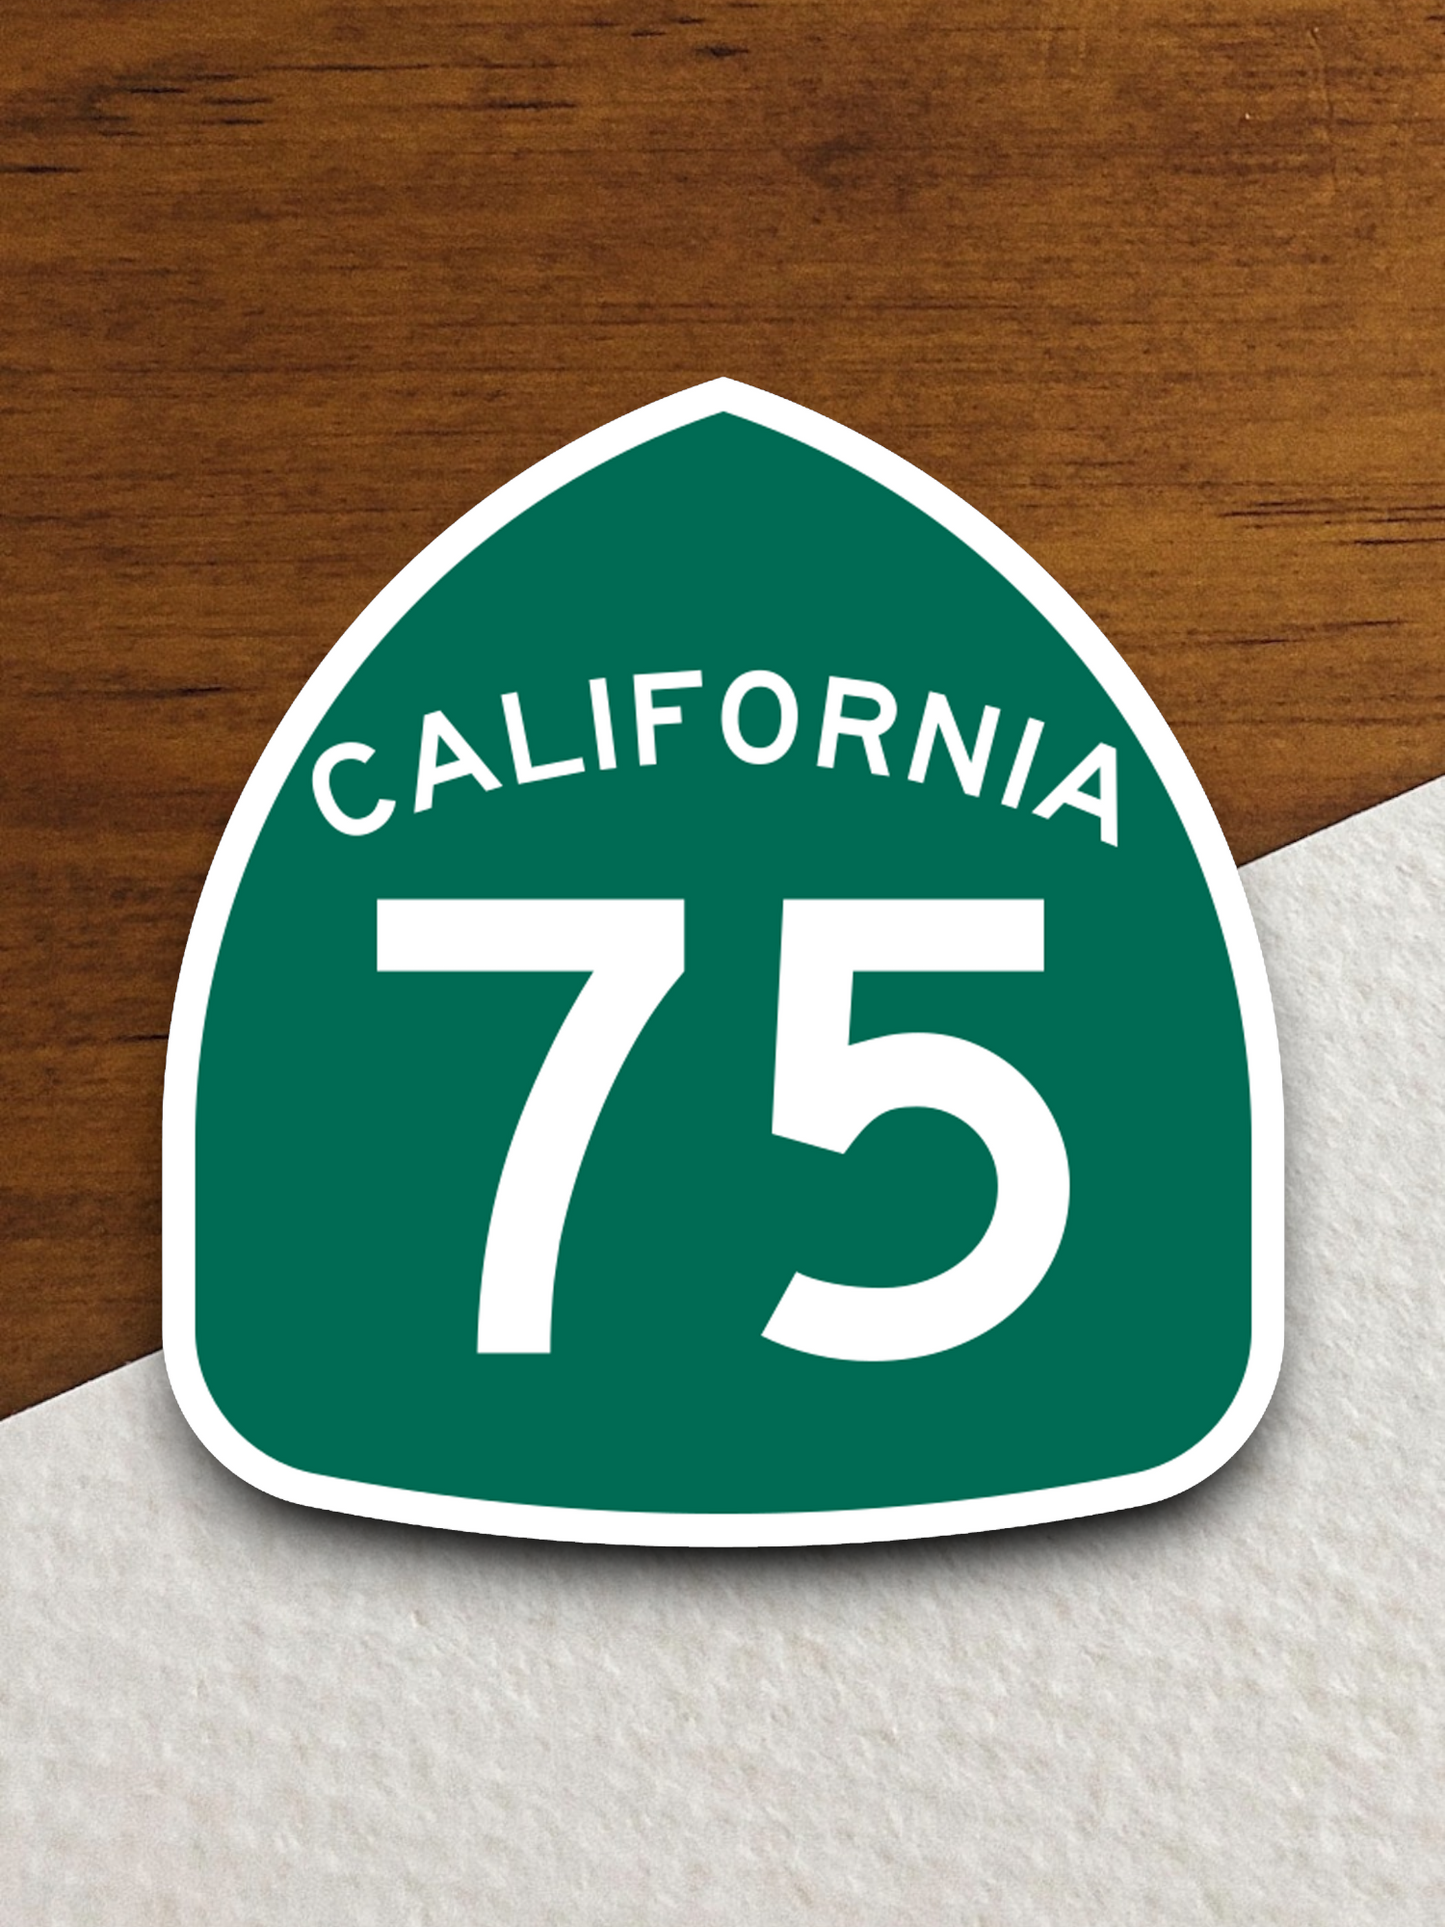 California State Route 75 Road Sign Sticker